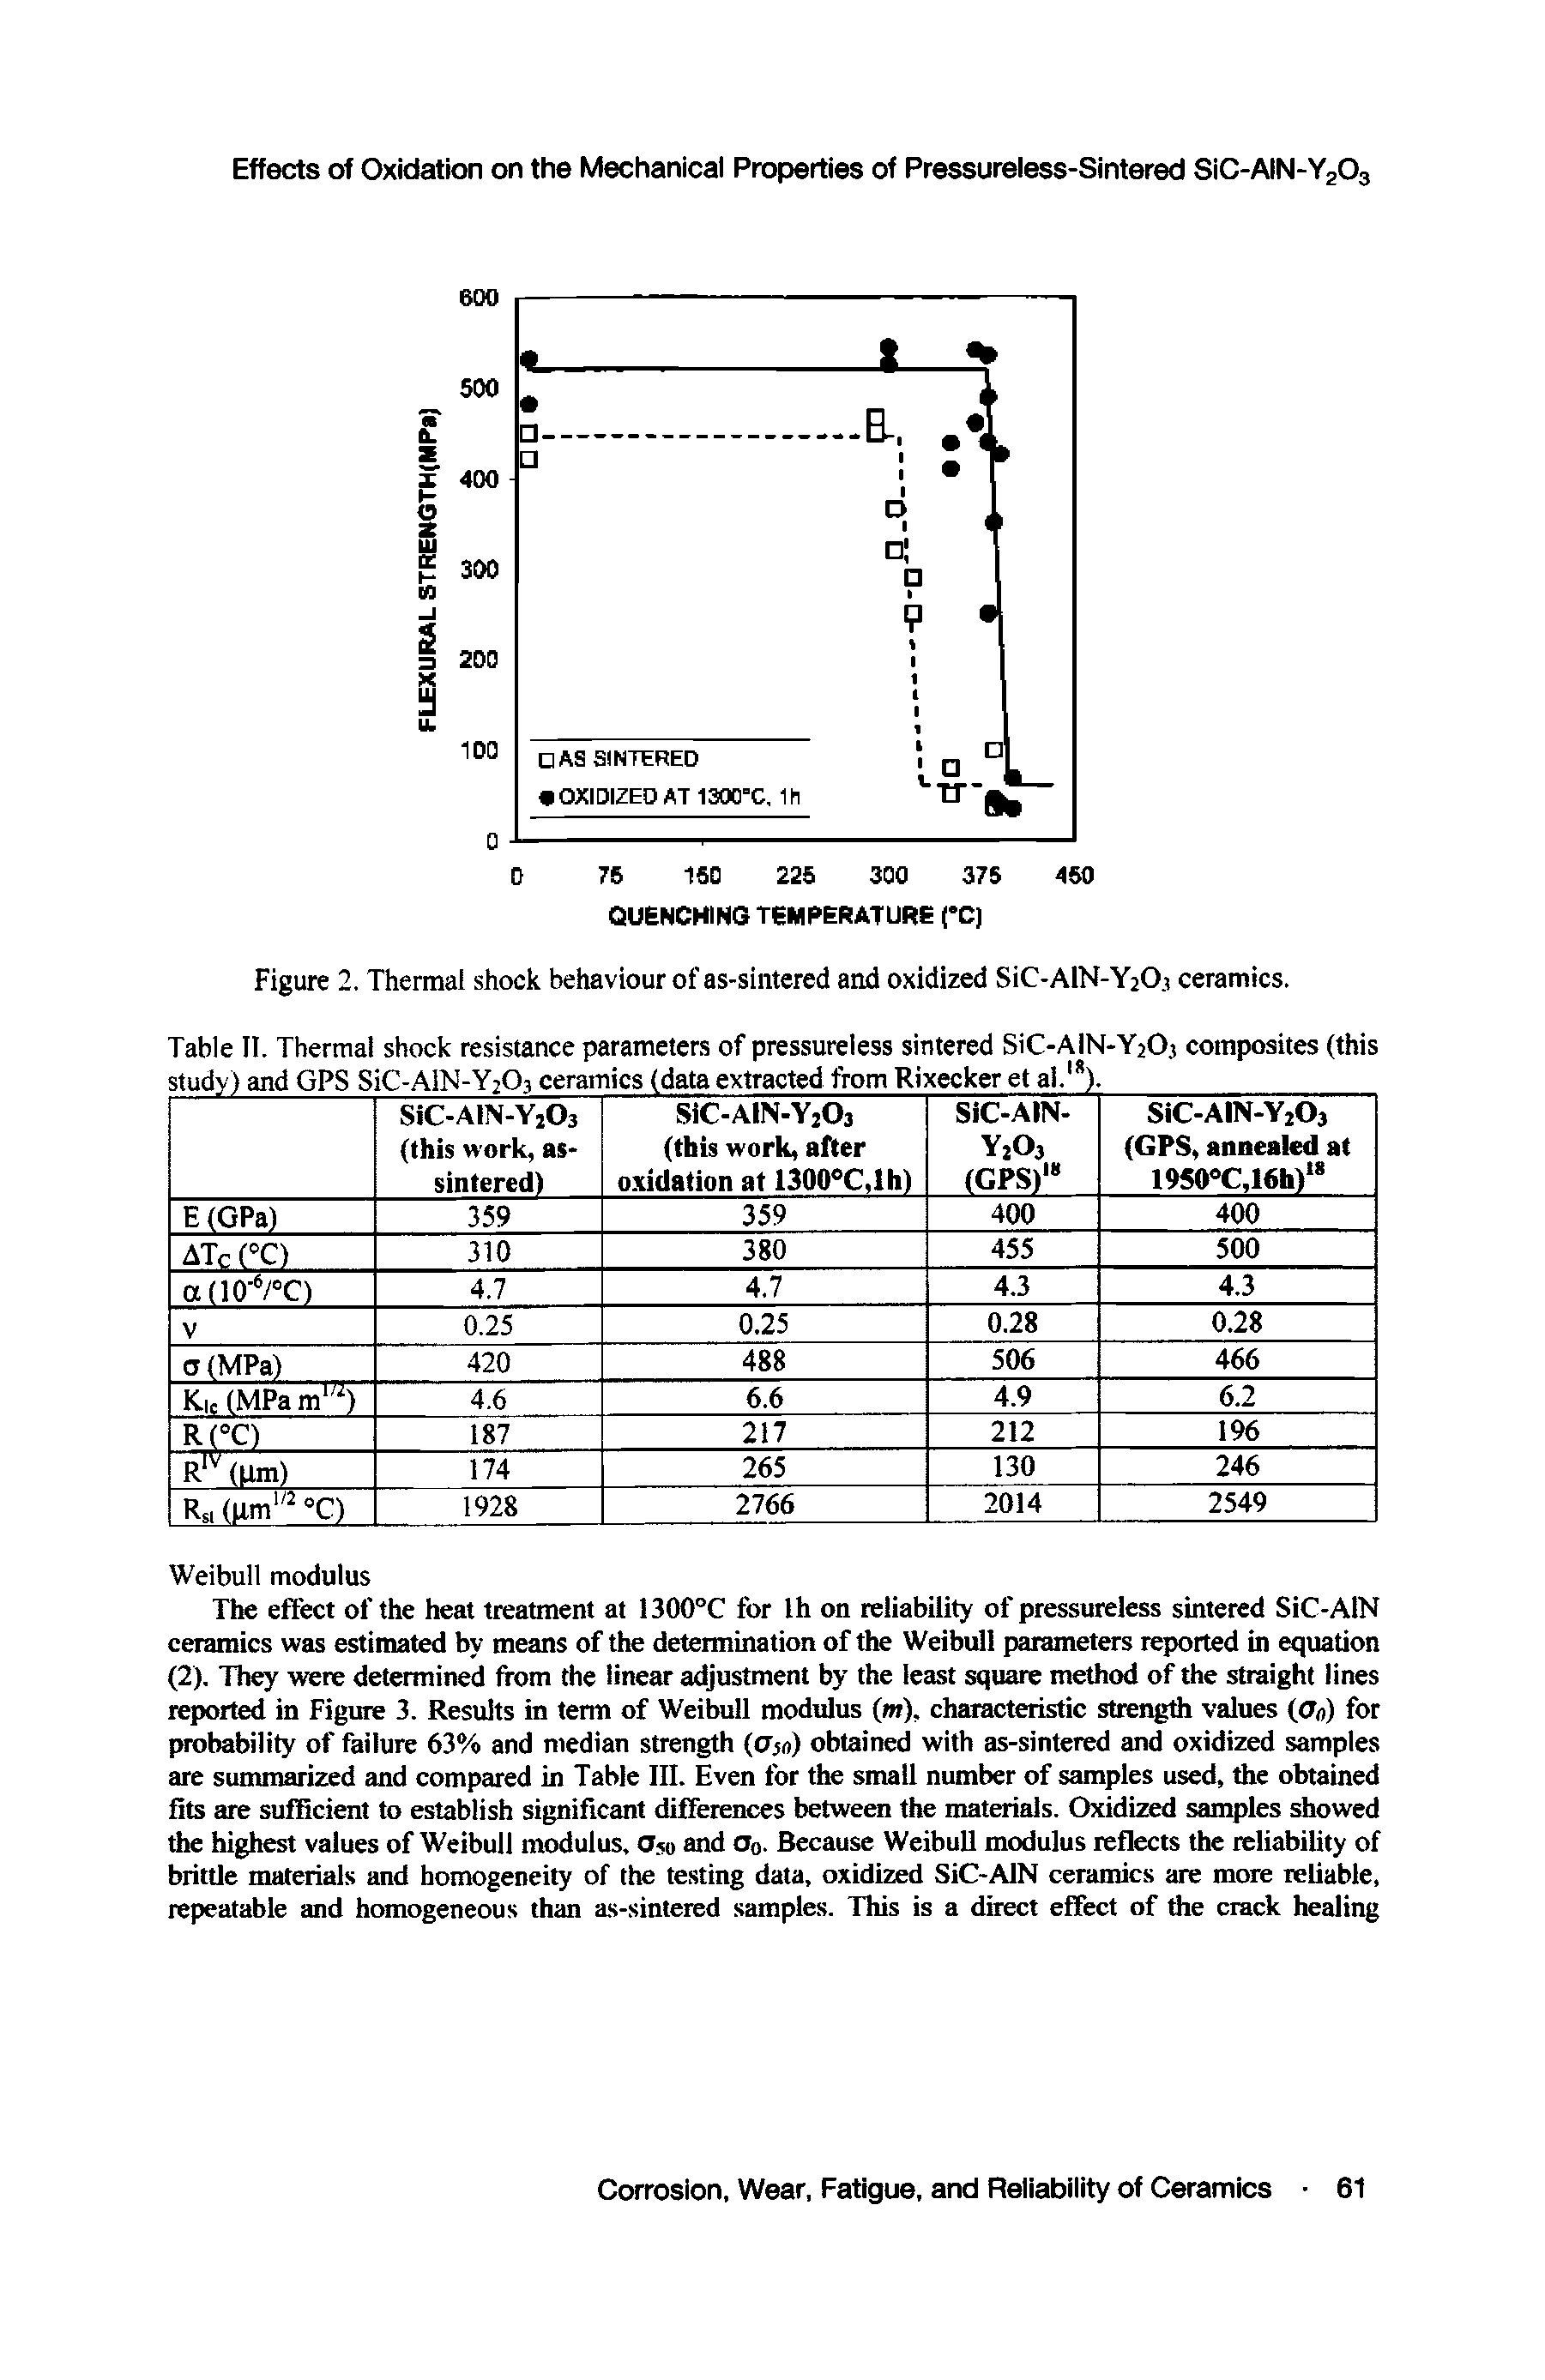 Table II. Thermal shock resistance parameters of pressureless sintered SiC-AiN-YaOj composites (this study ) and GPS SiC-AlN-Y203 ceramics (data extracted from Rixecker et al. ).